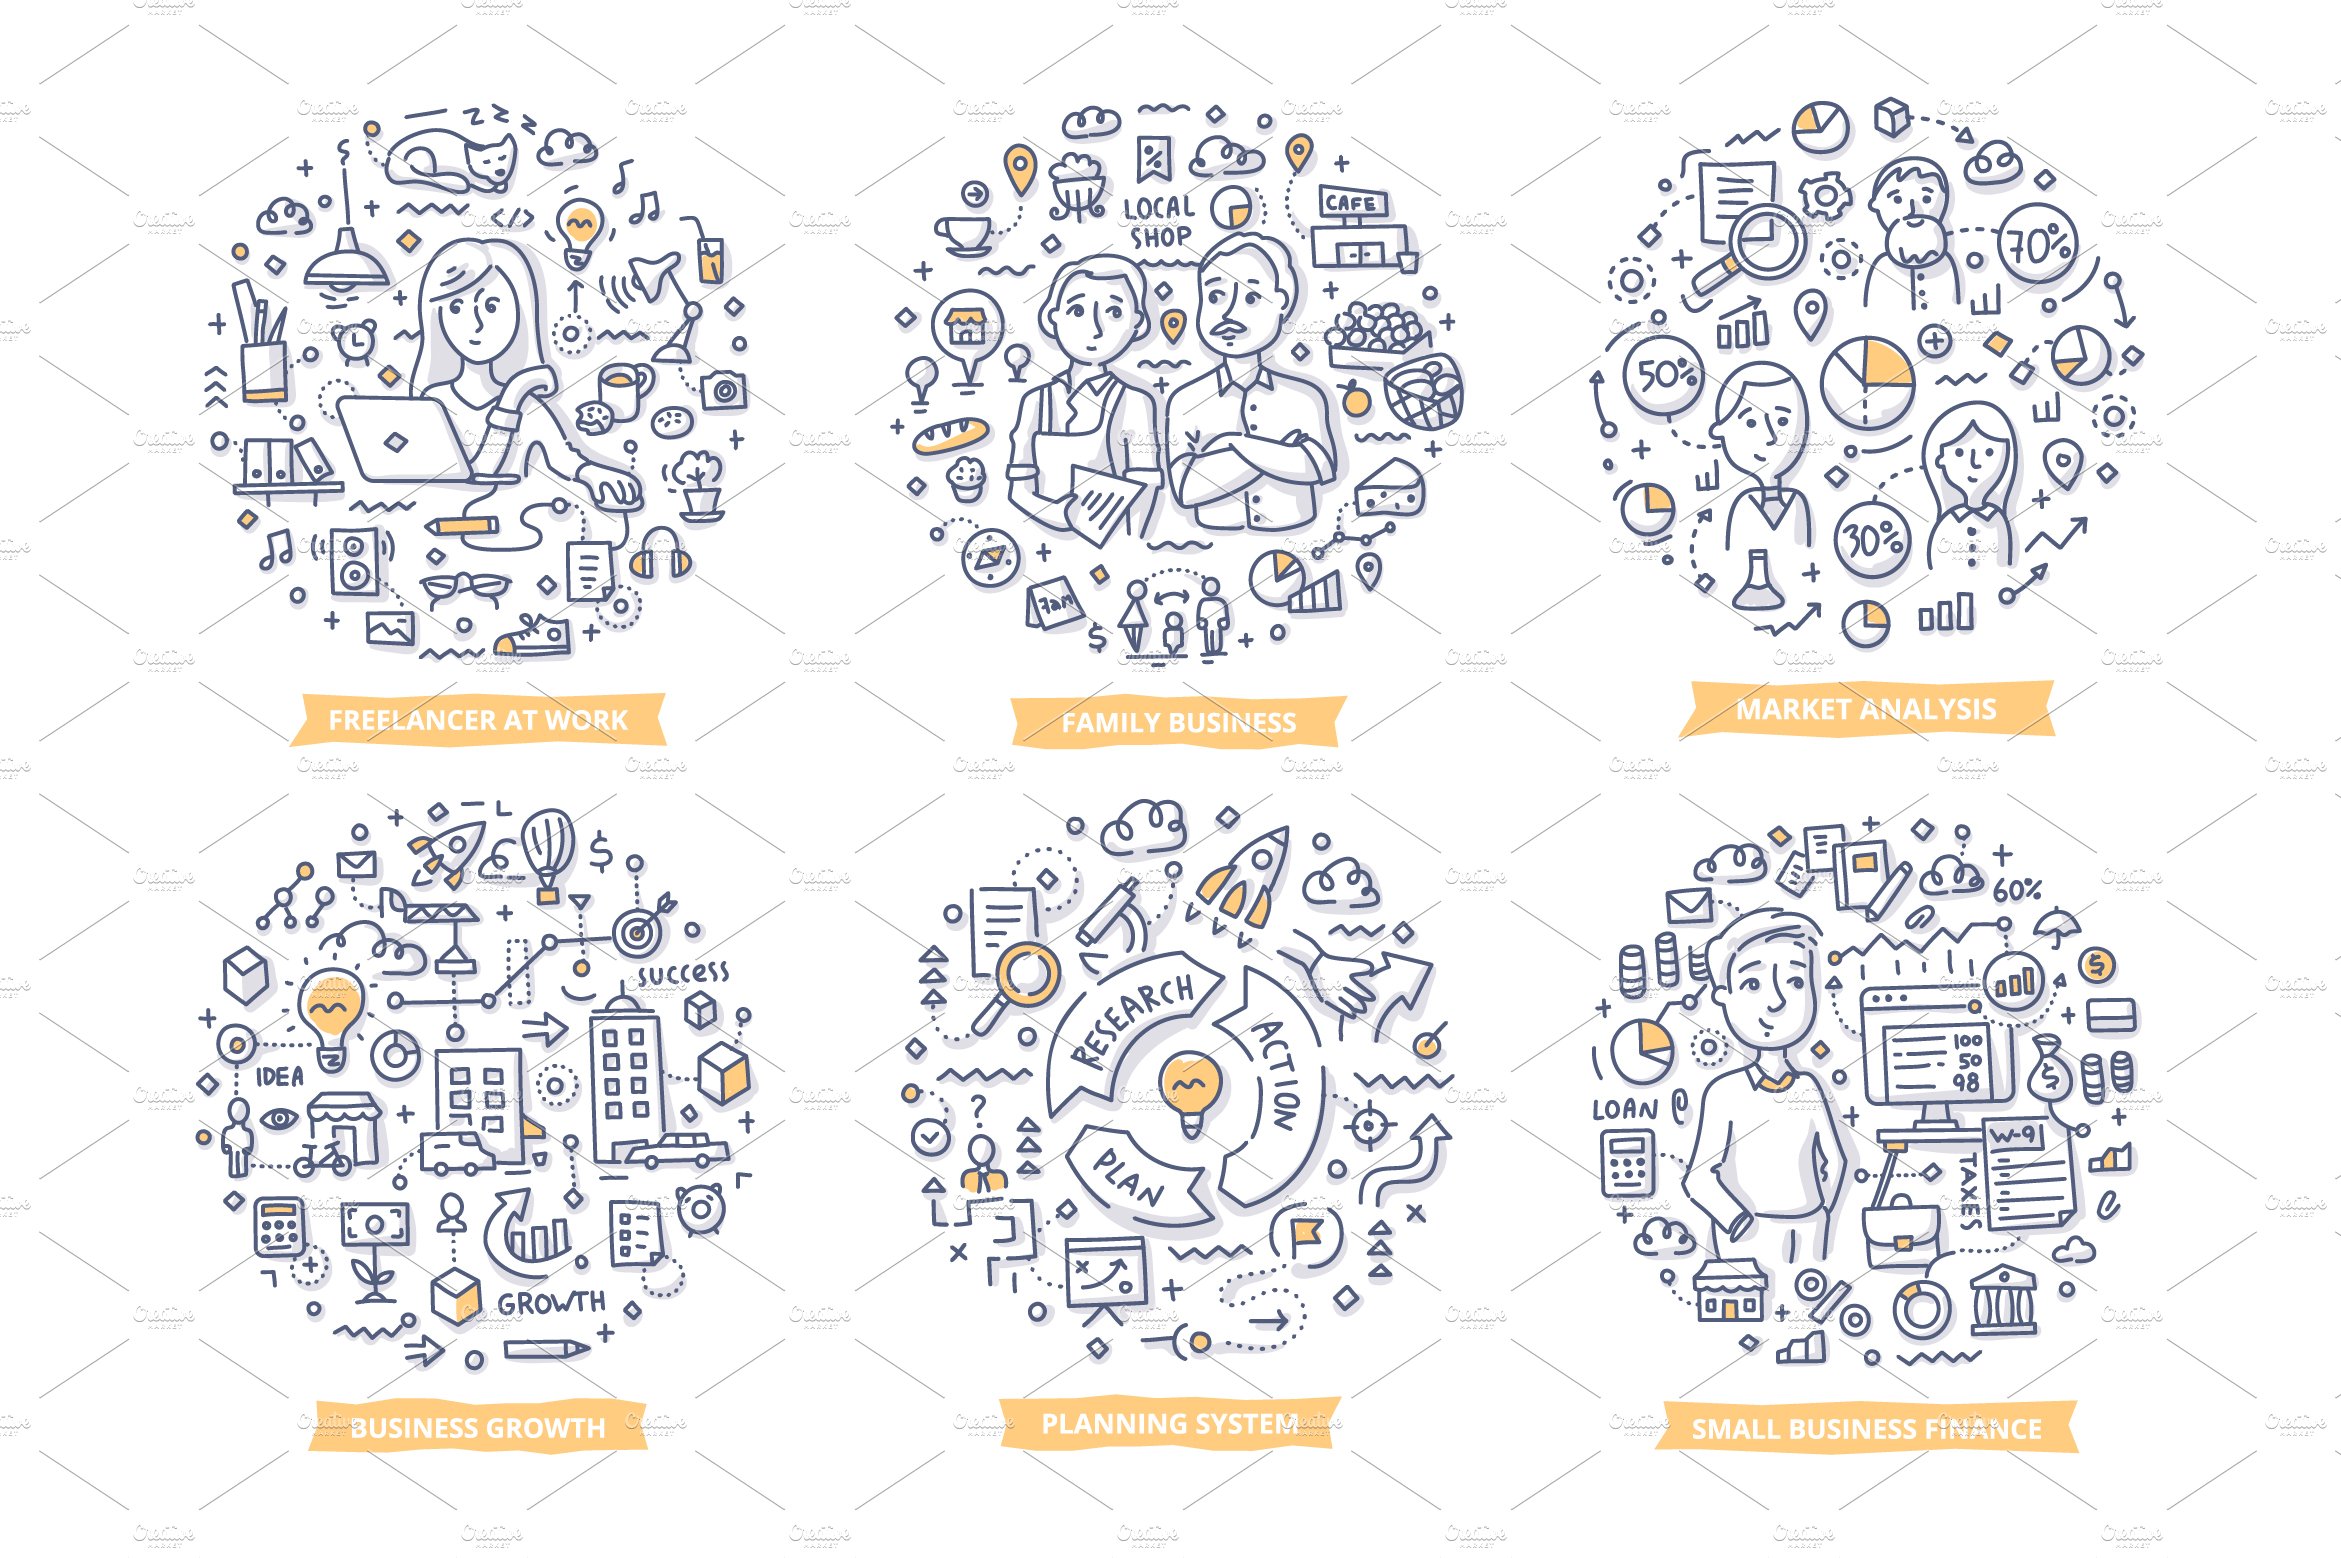 A set of four circular icons with different types of people.